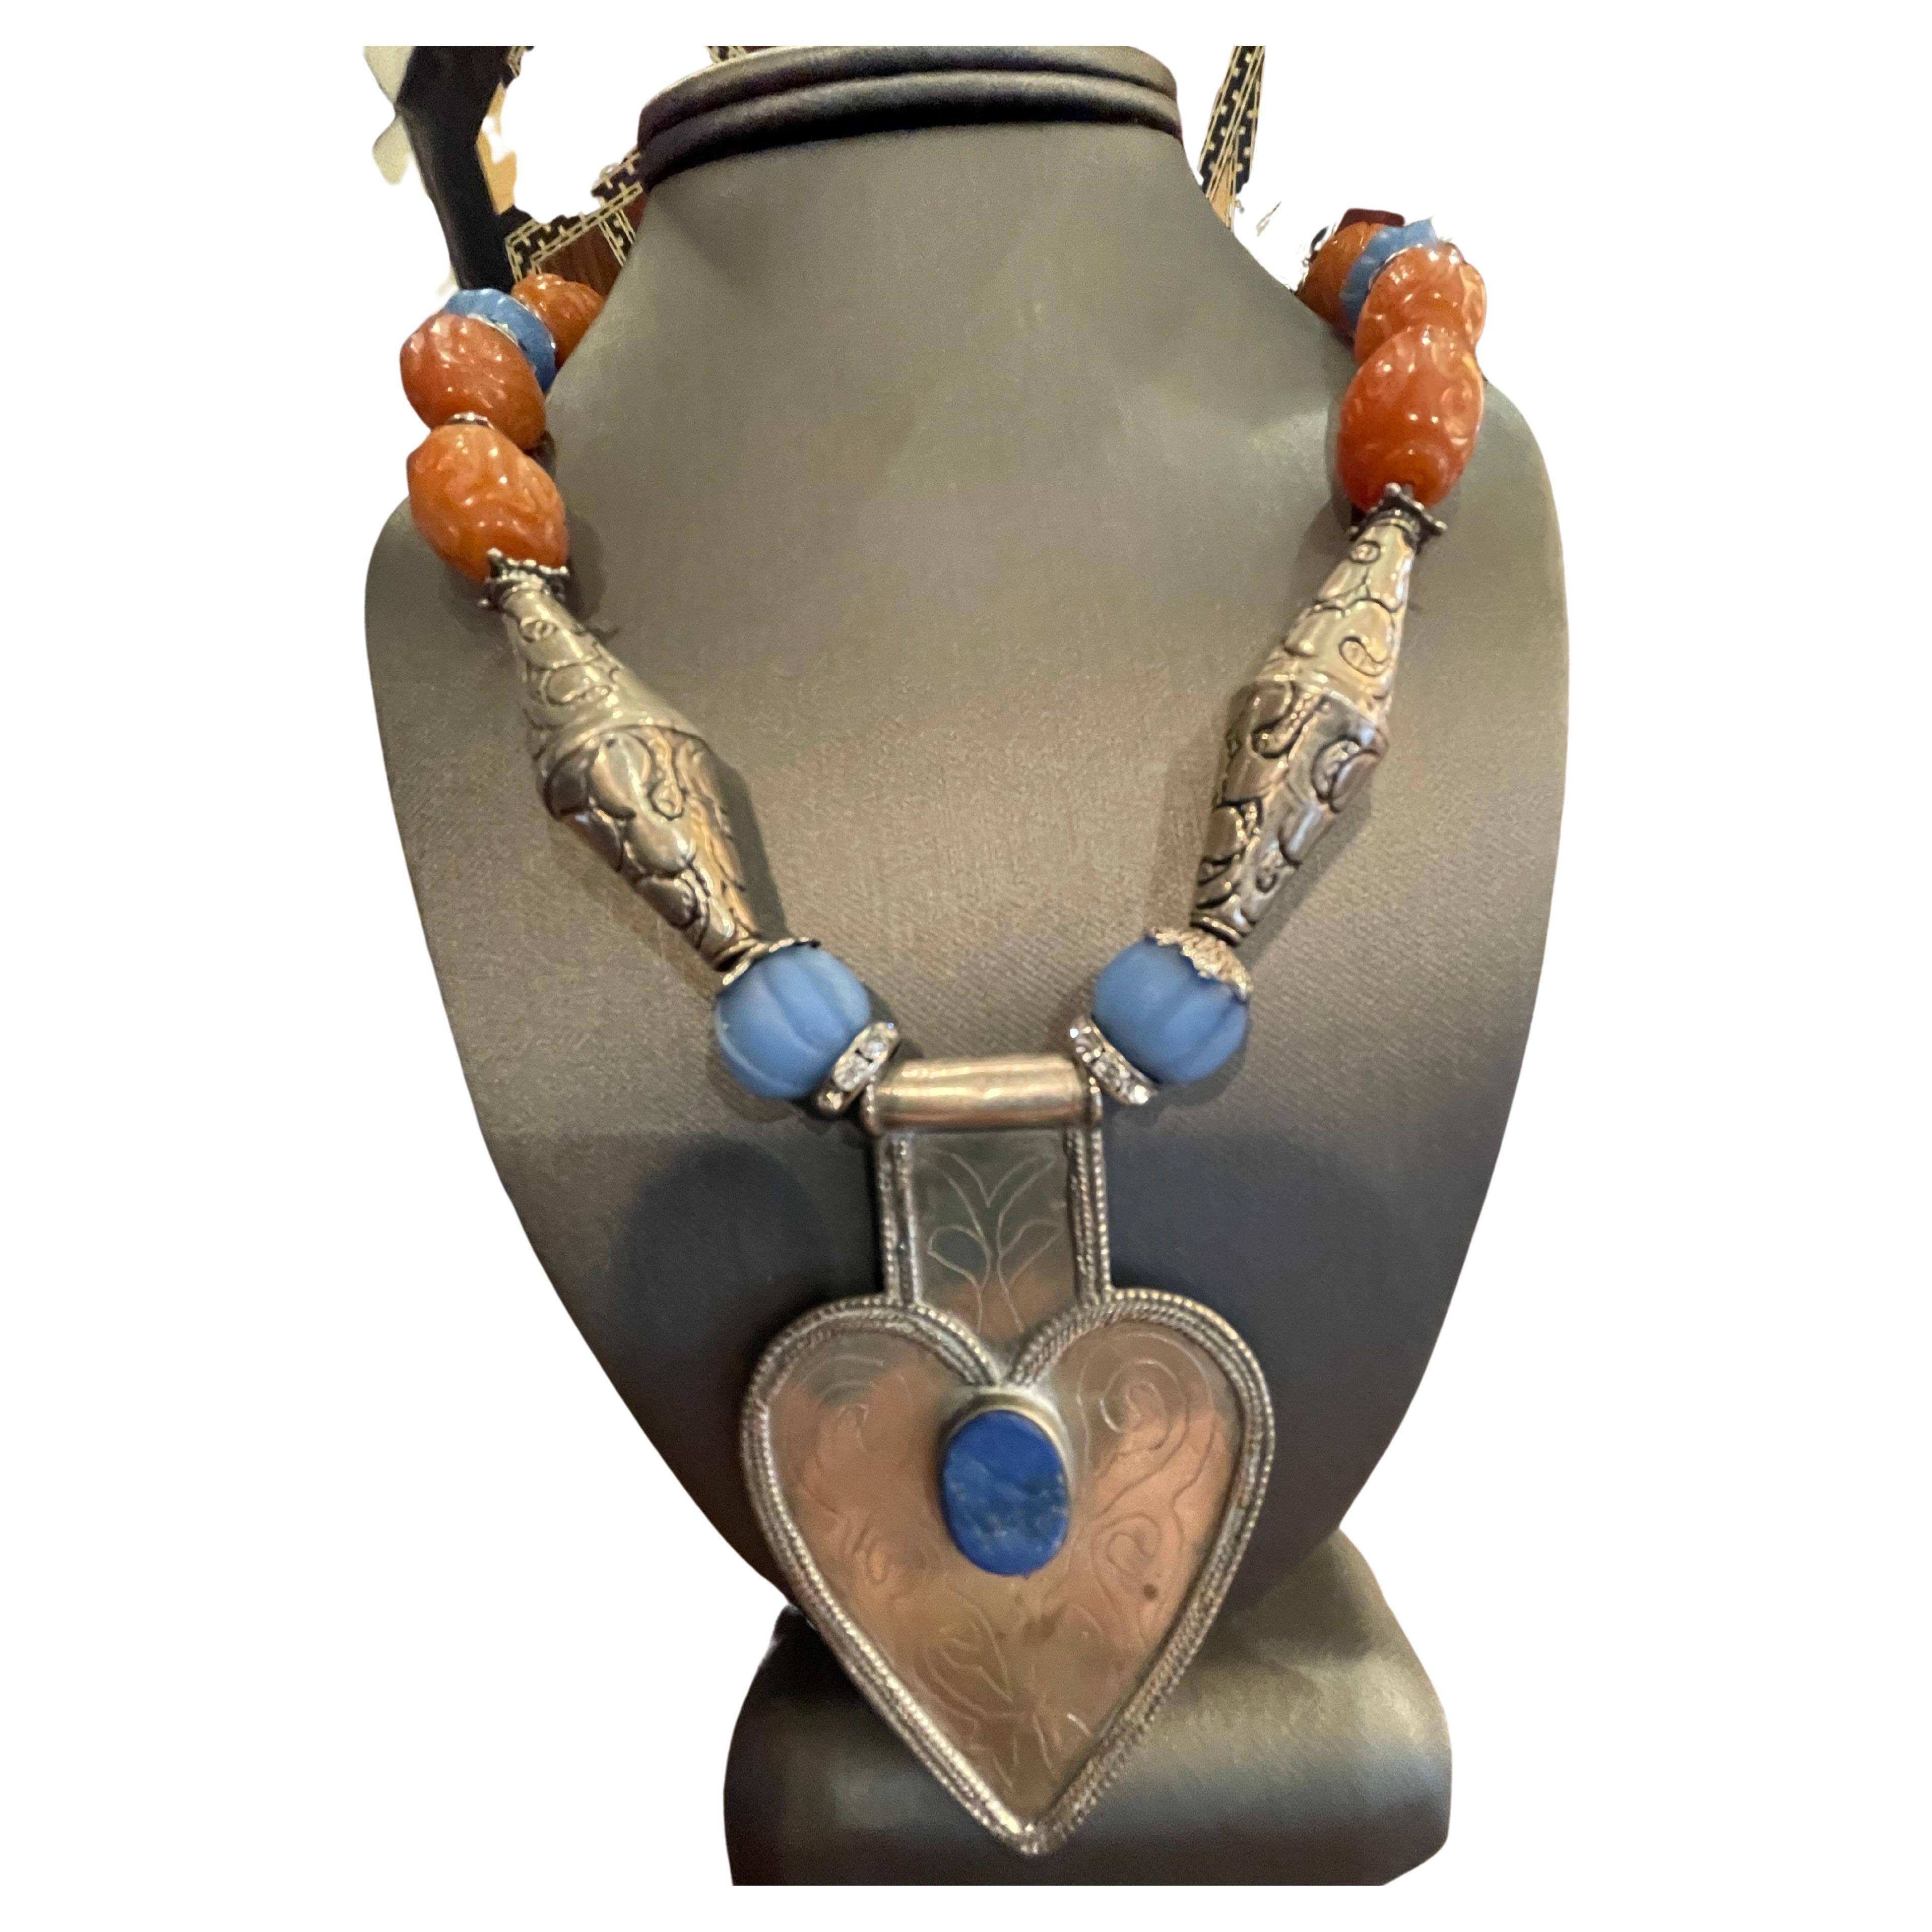 Vintage silver and lapis lazuli Afghani pendant necklace is on offer from LB. This fabulous heart shaped pendant is strung on a string of carved antique,Chinese,carnelian beads,melon shaped antique Tibetan blue glass beads,Tibetan silver chased